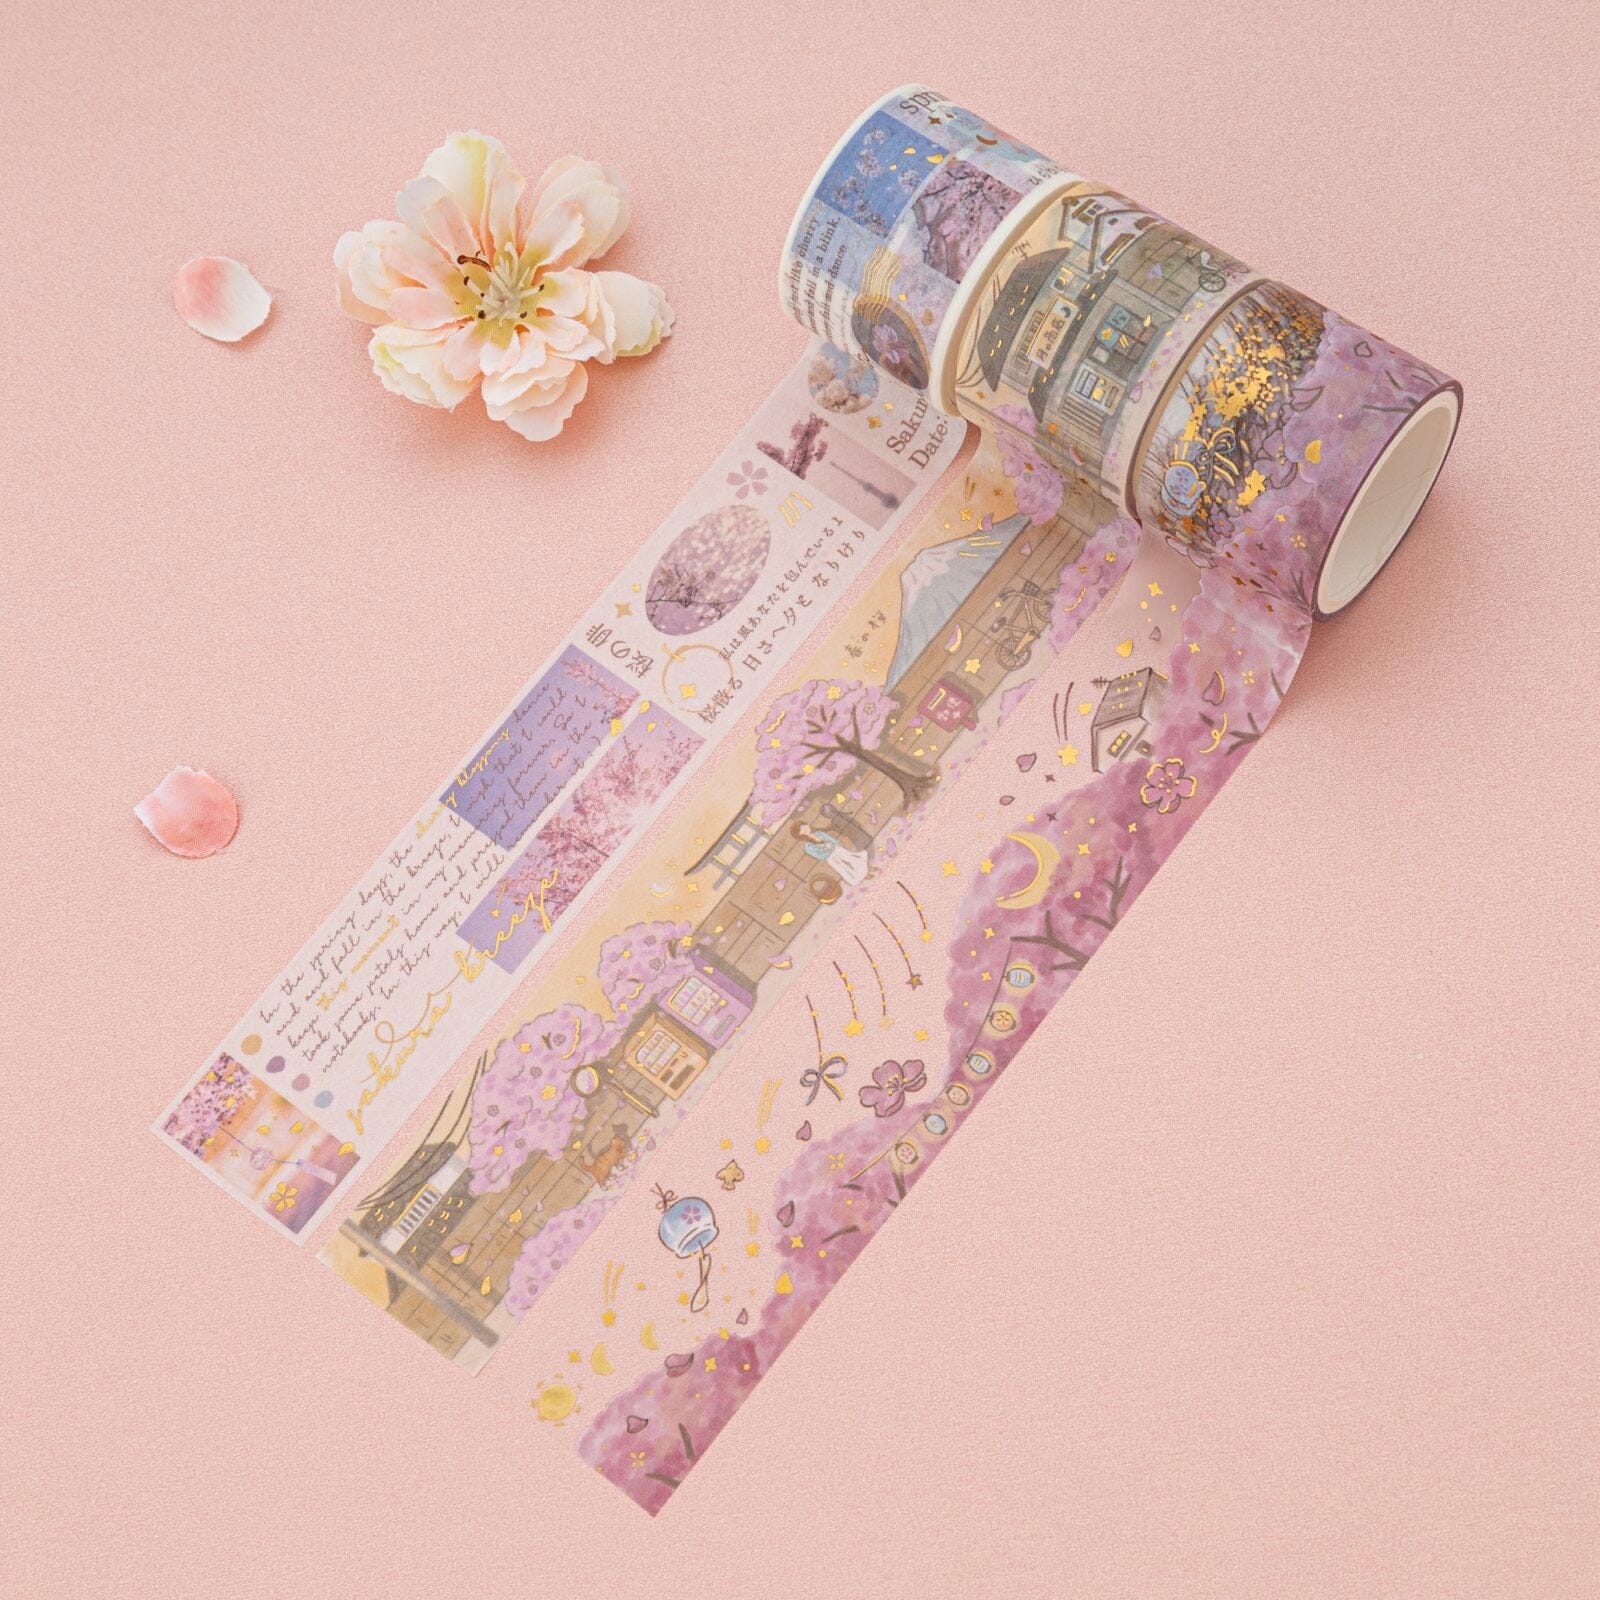 Tsuki 'Floral' Washi Tapes + Stickers Set ☾ – NotebookTherapy